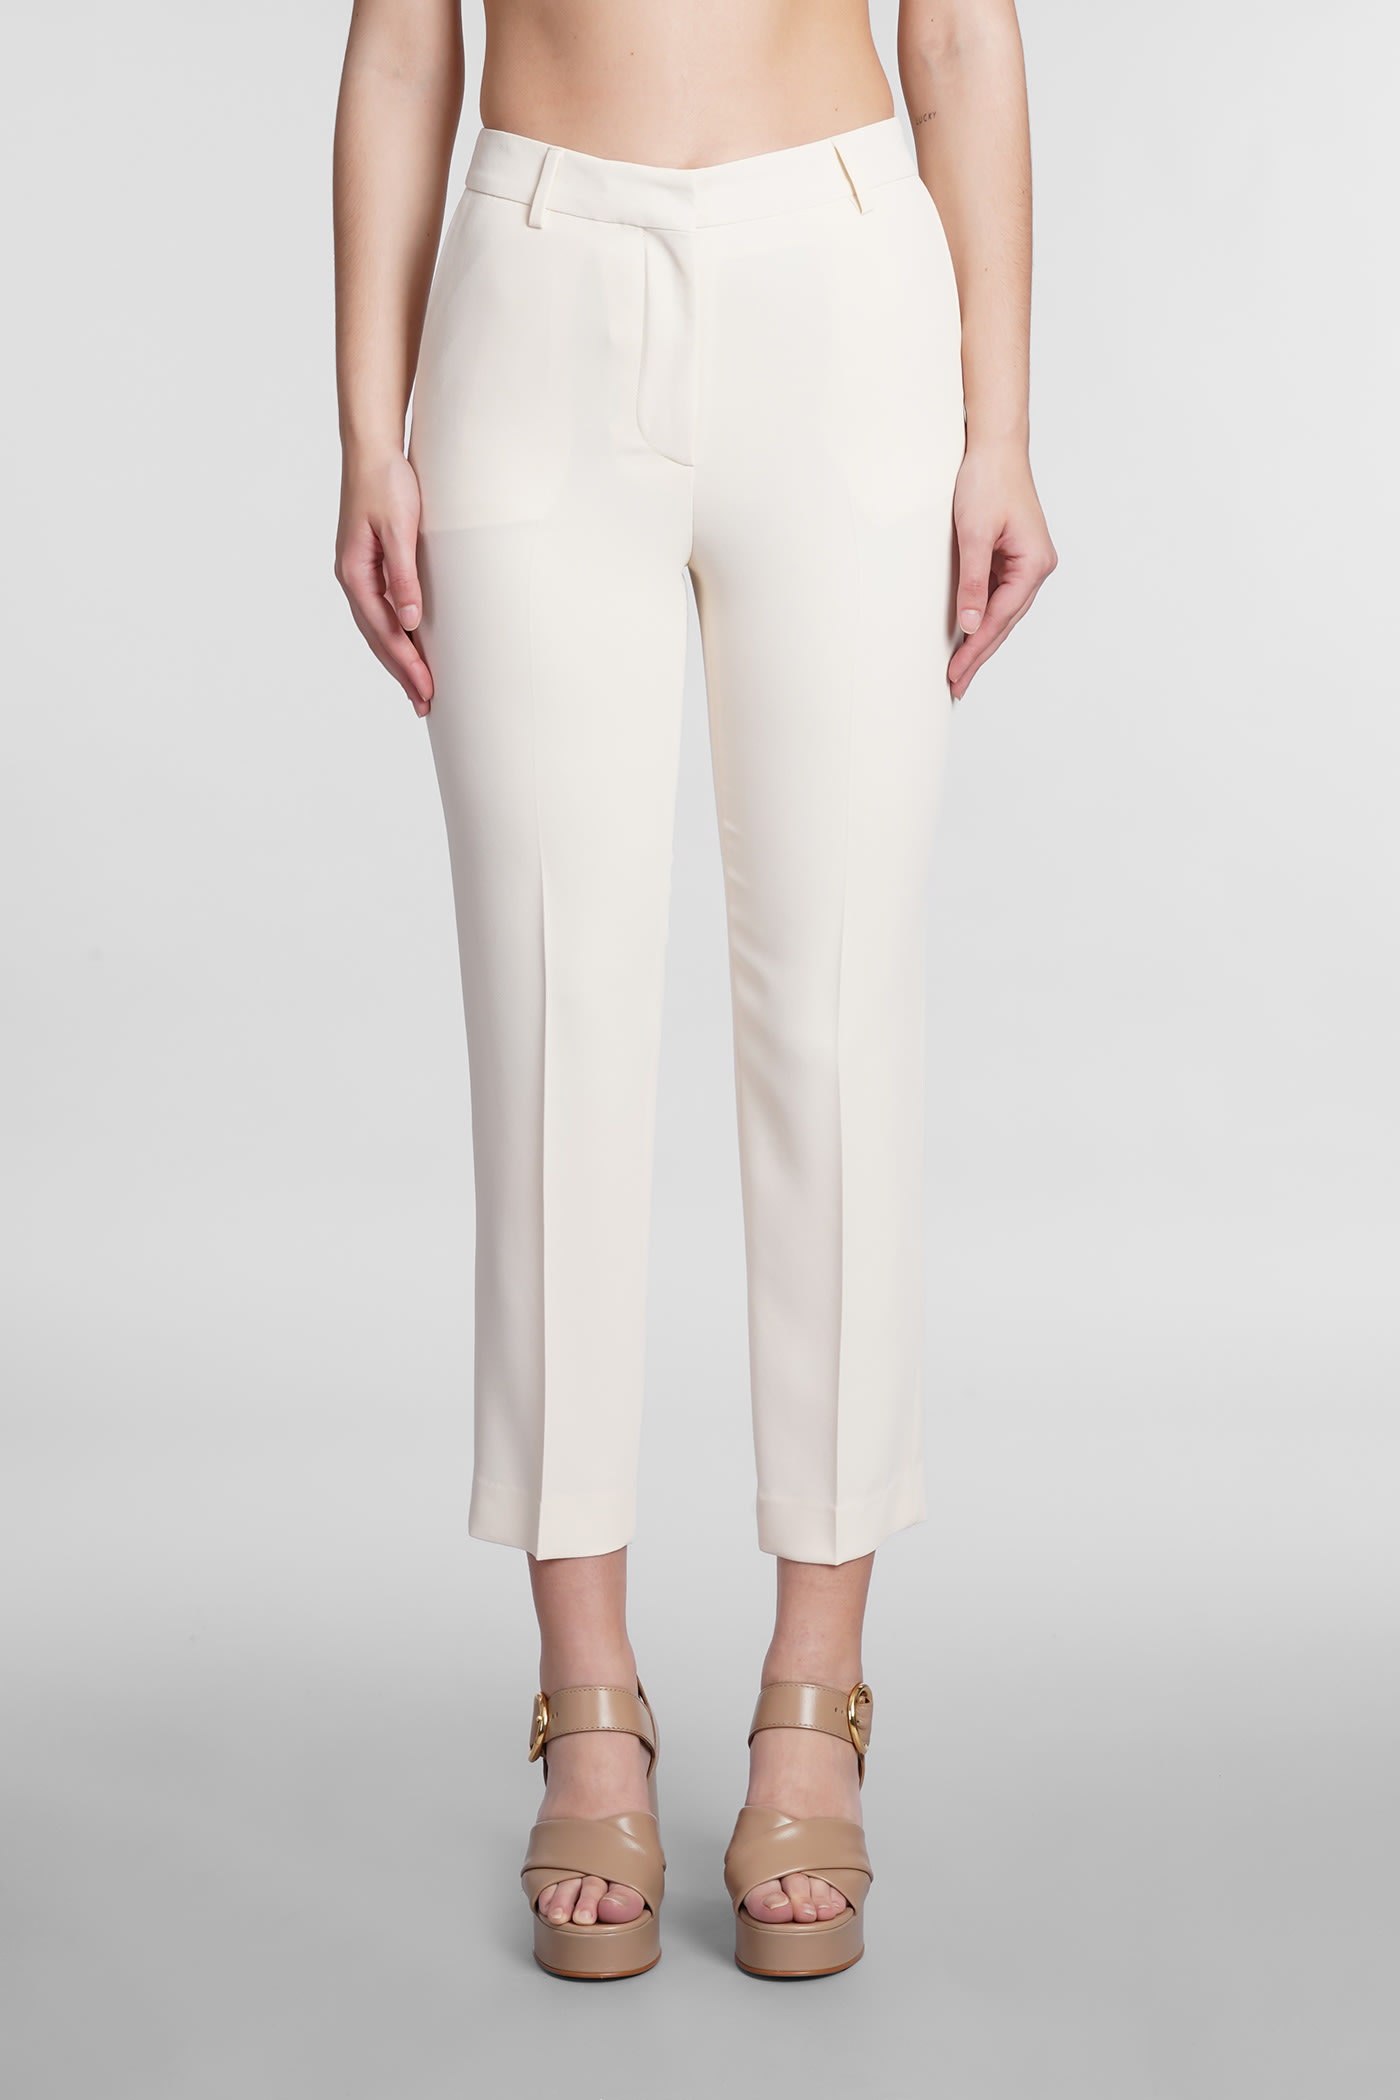 See By Chloé Pants In Beige Cotton